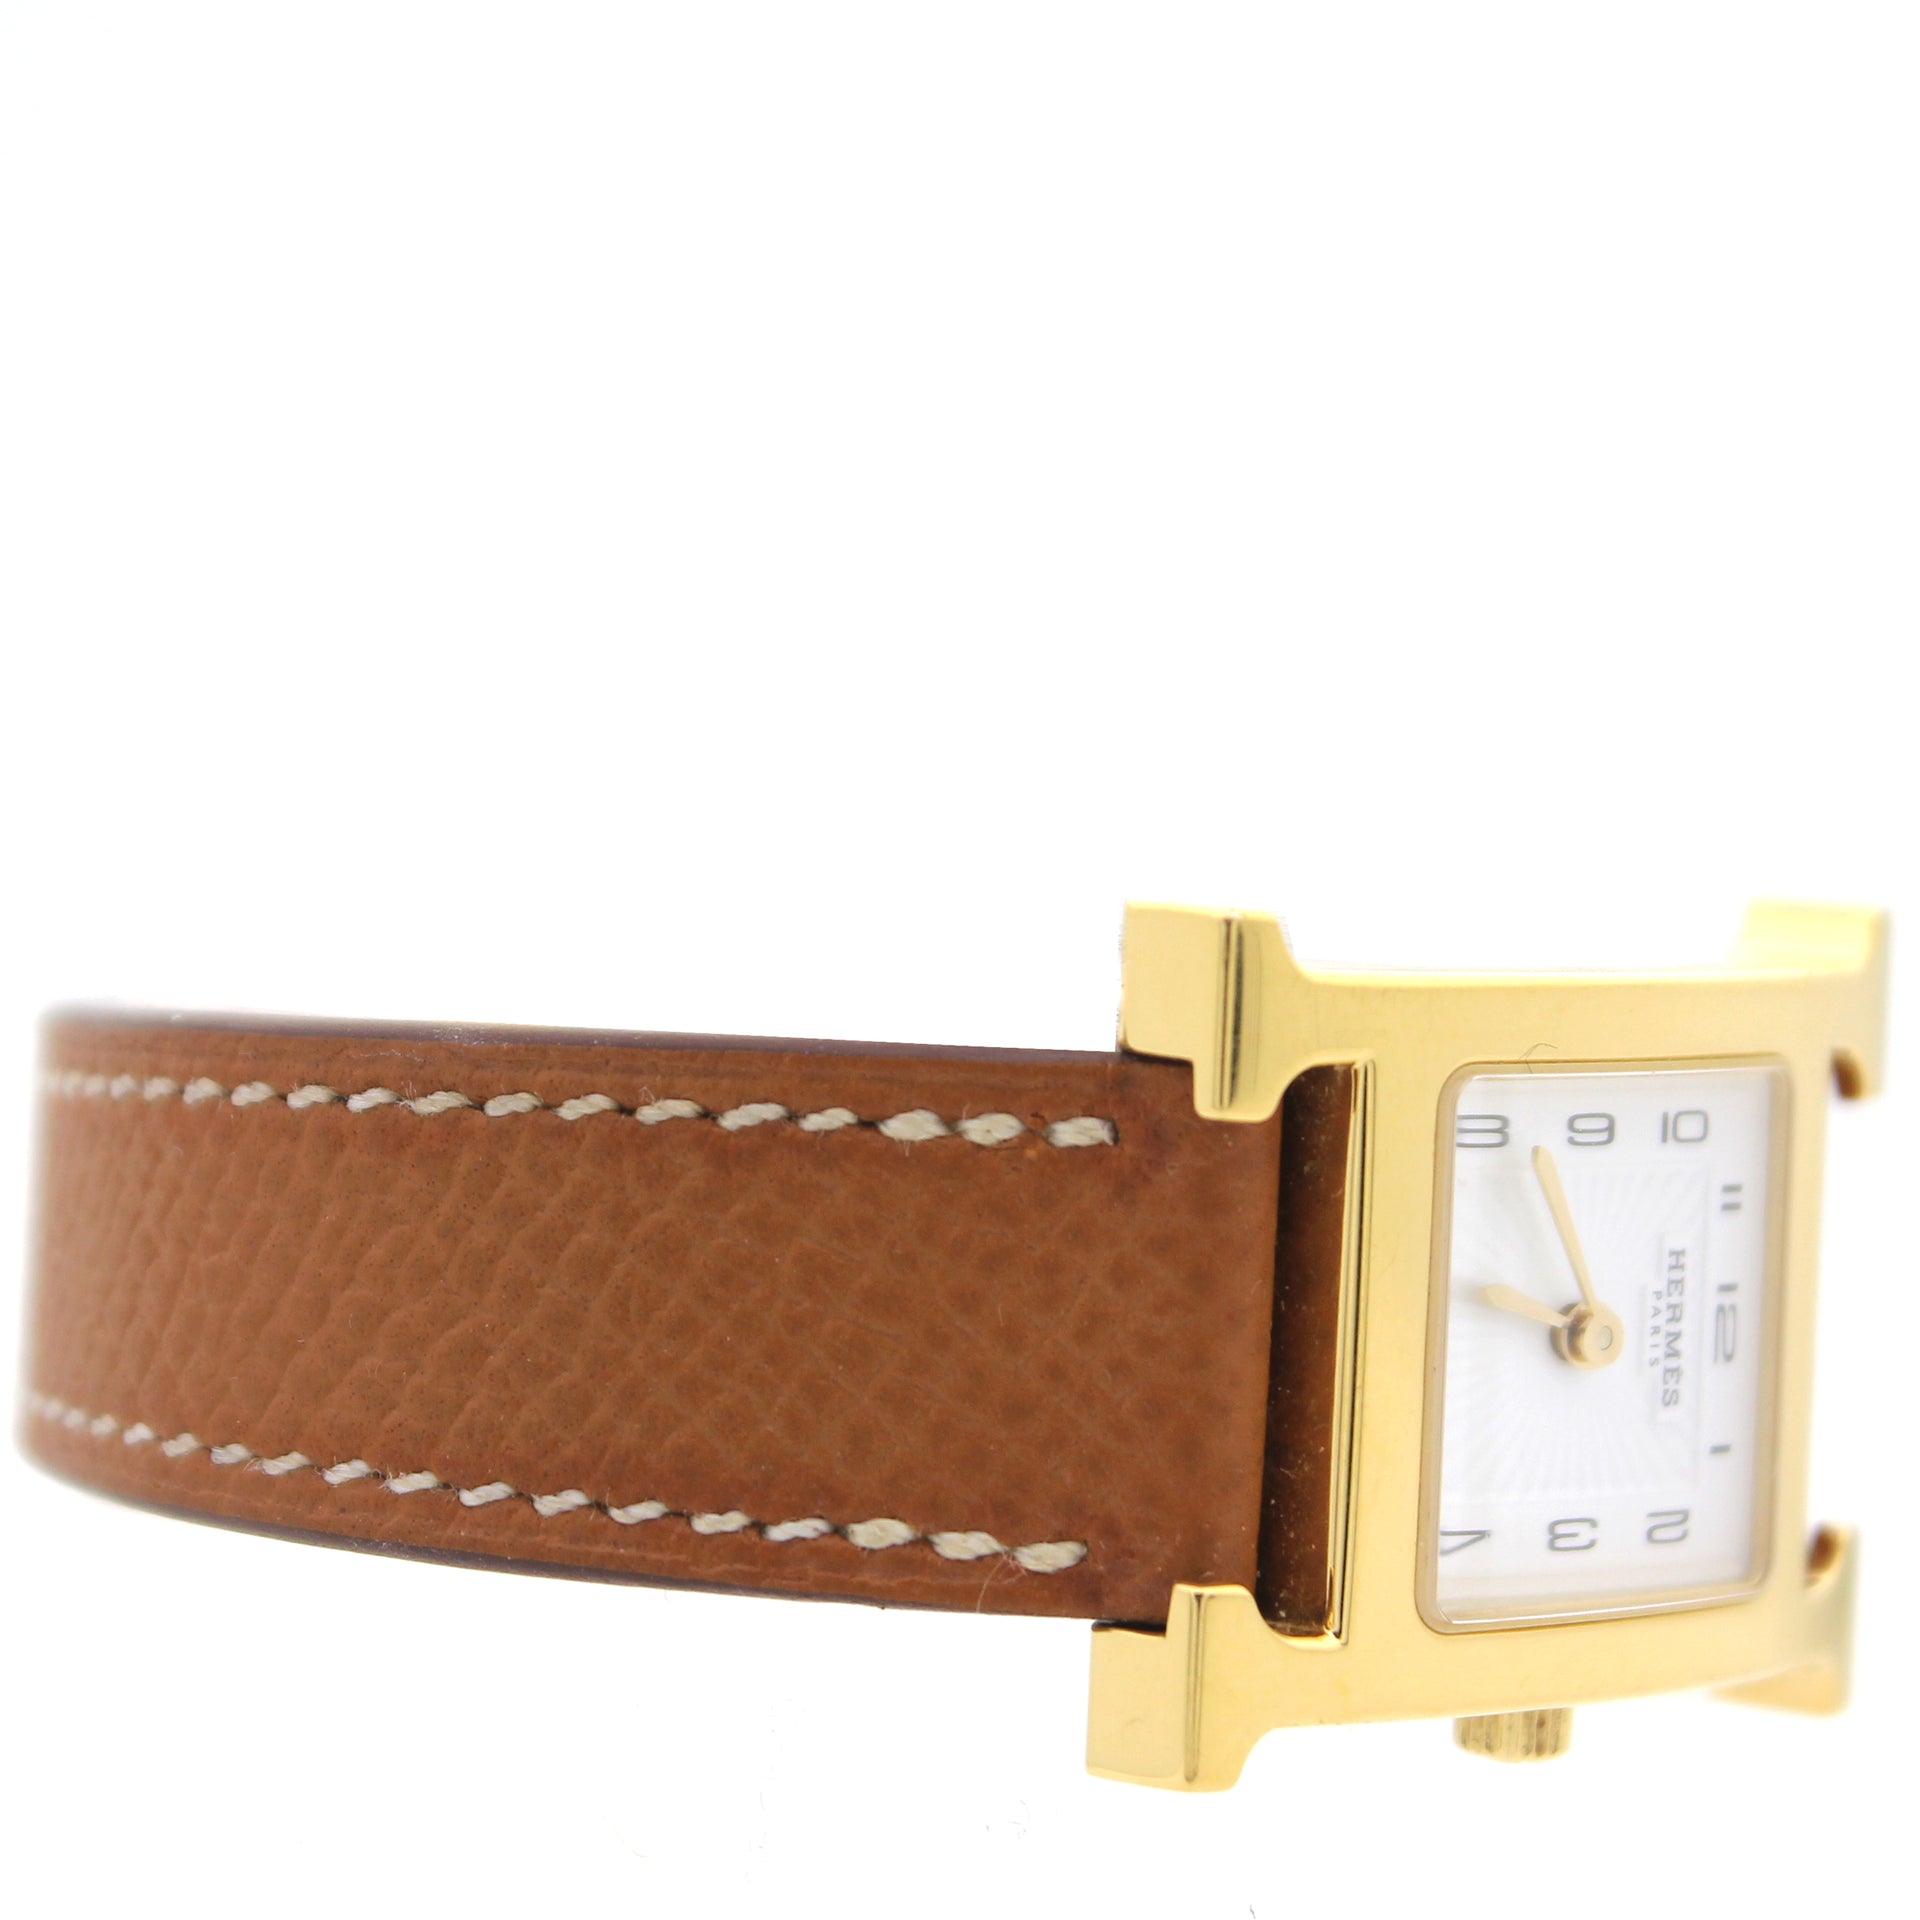 Hermès Heure H Watch PM Gold Plated Etoupe Epsom Leather Strap – SukiLux